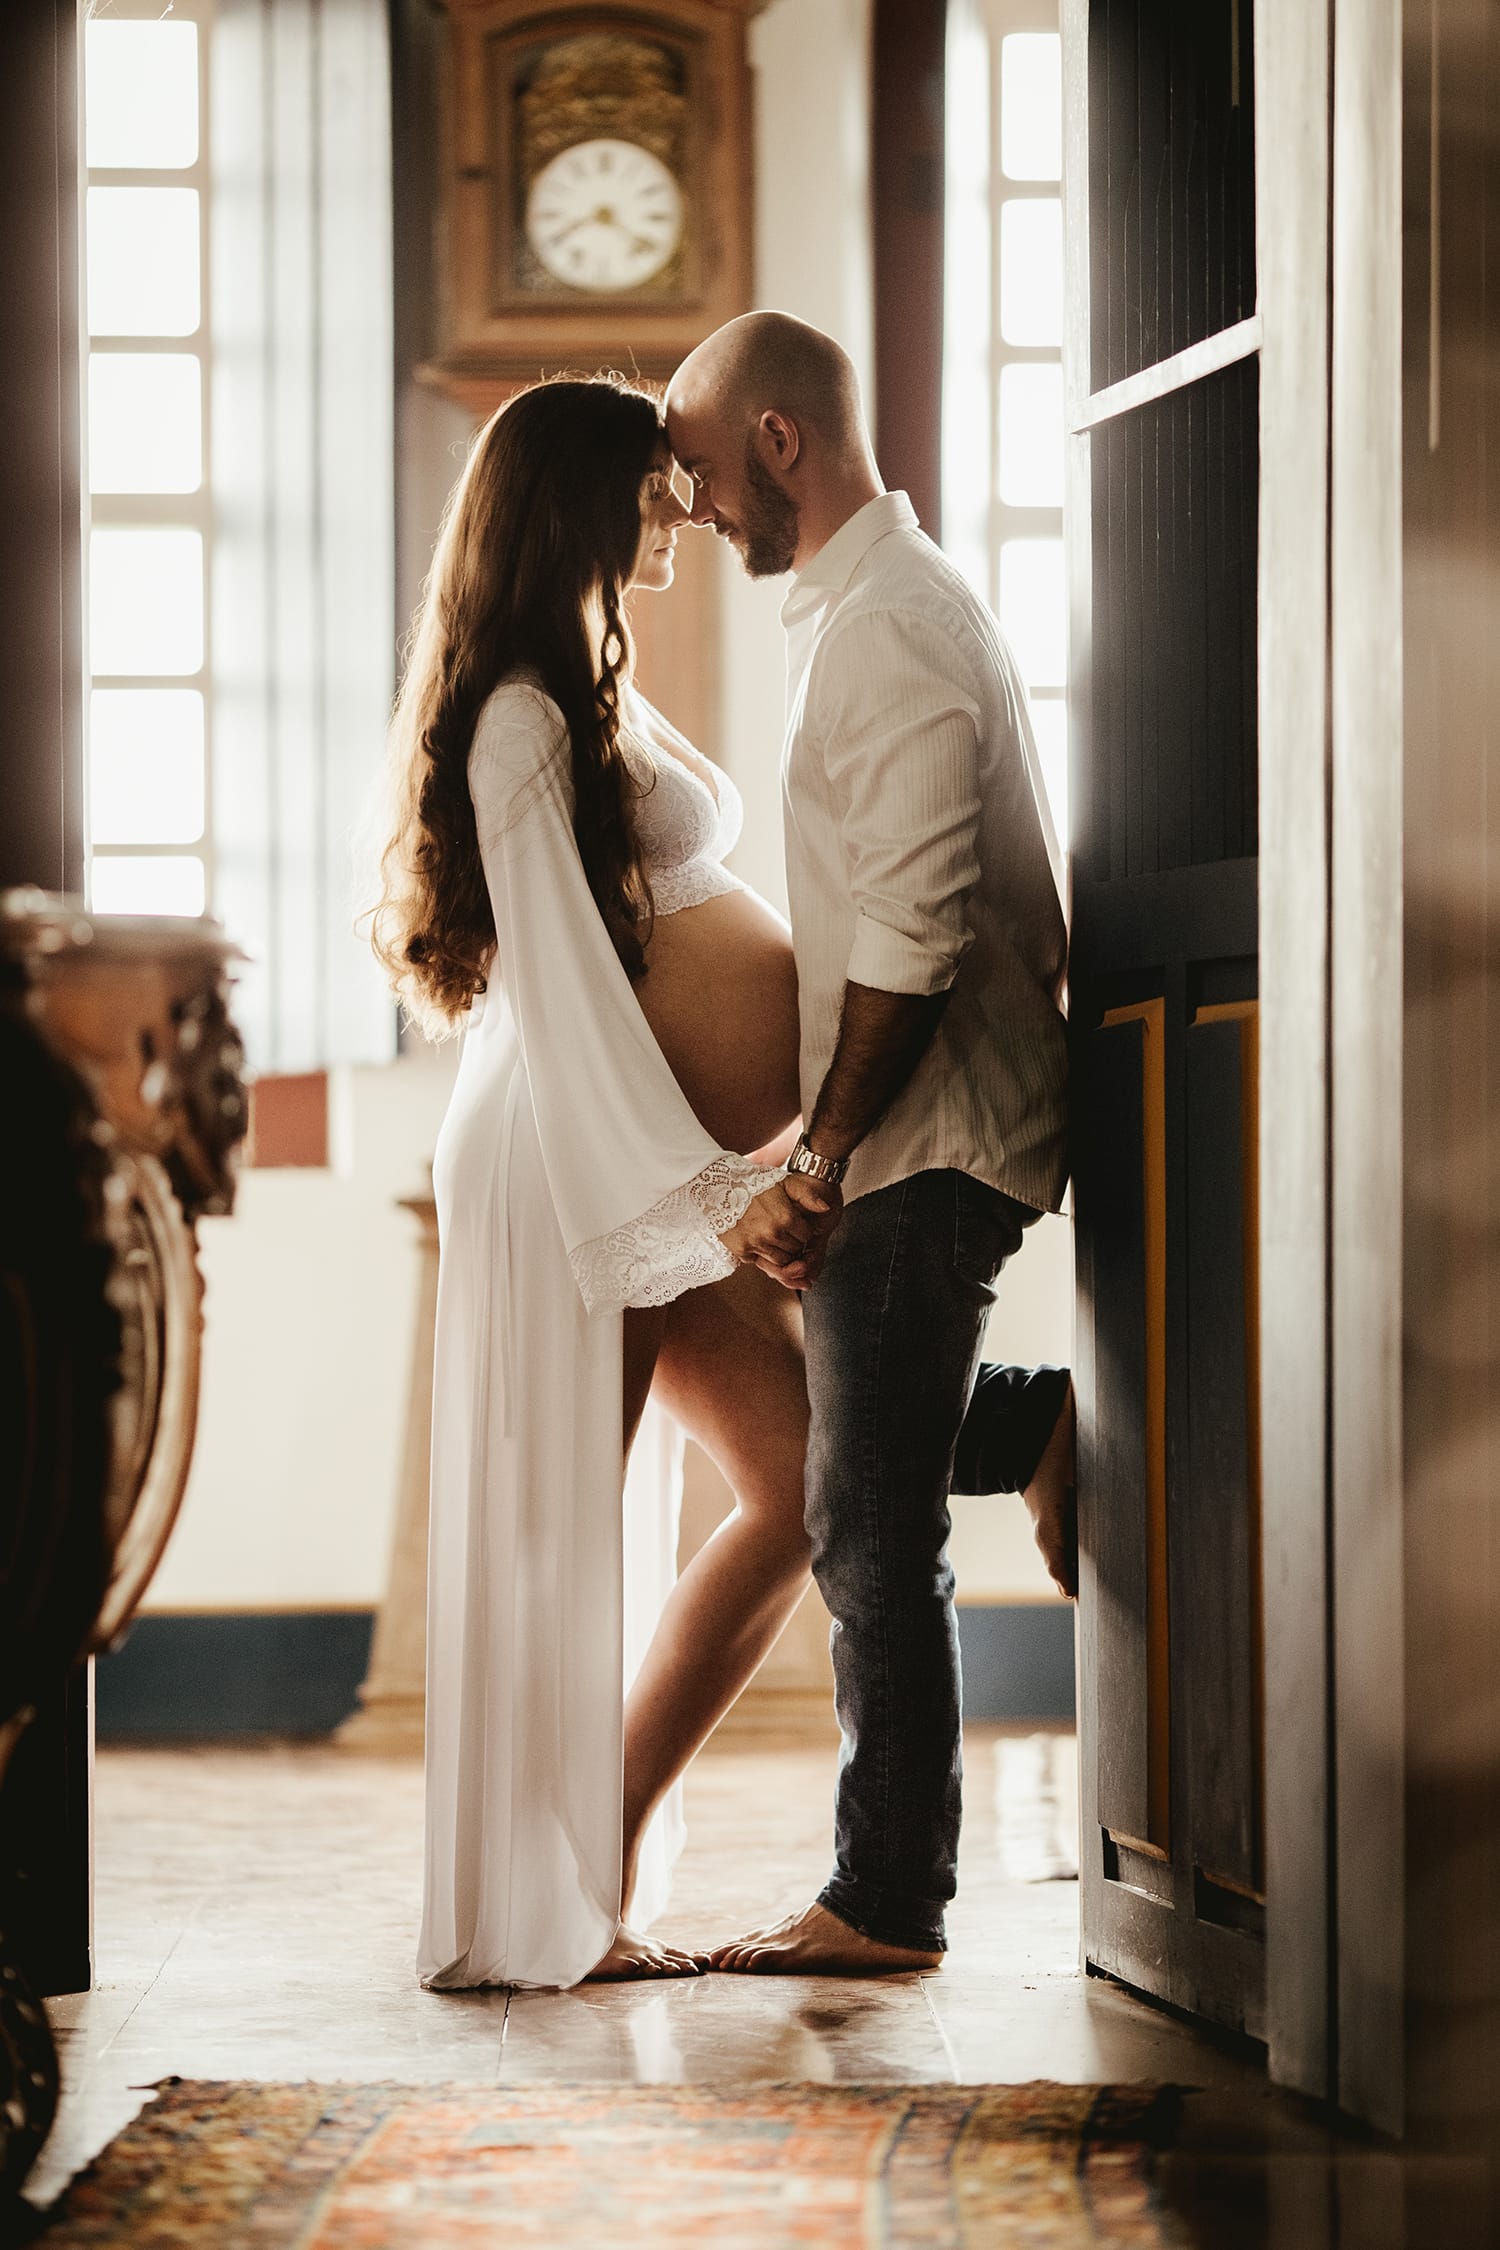 How to Ensure Your Maternity Photography Session Is a Success